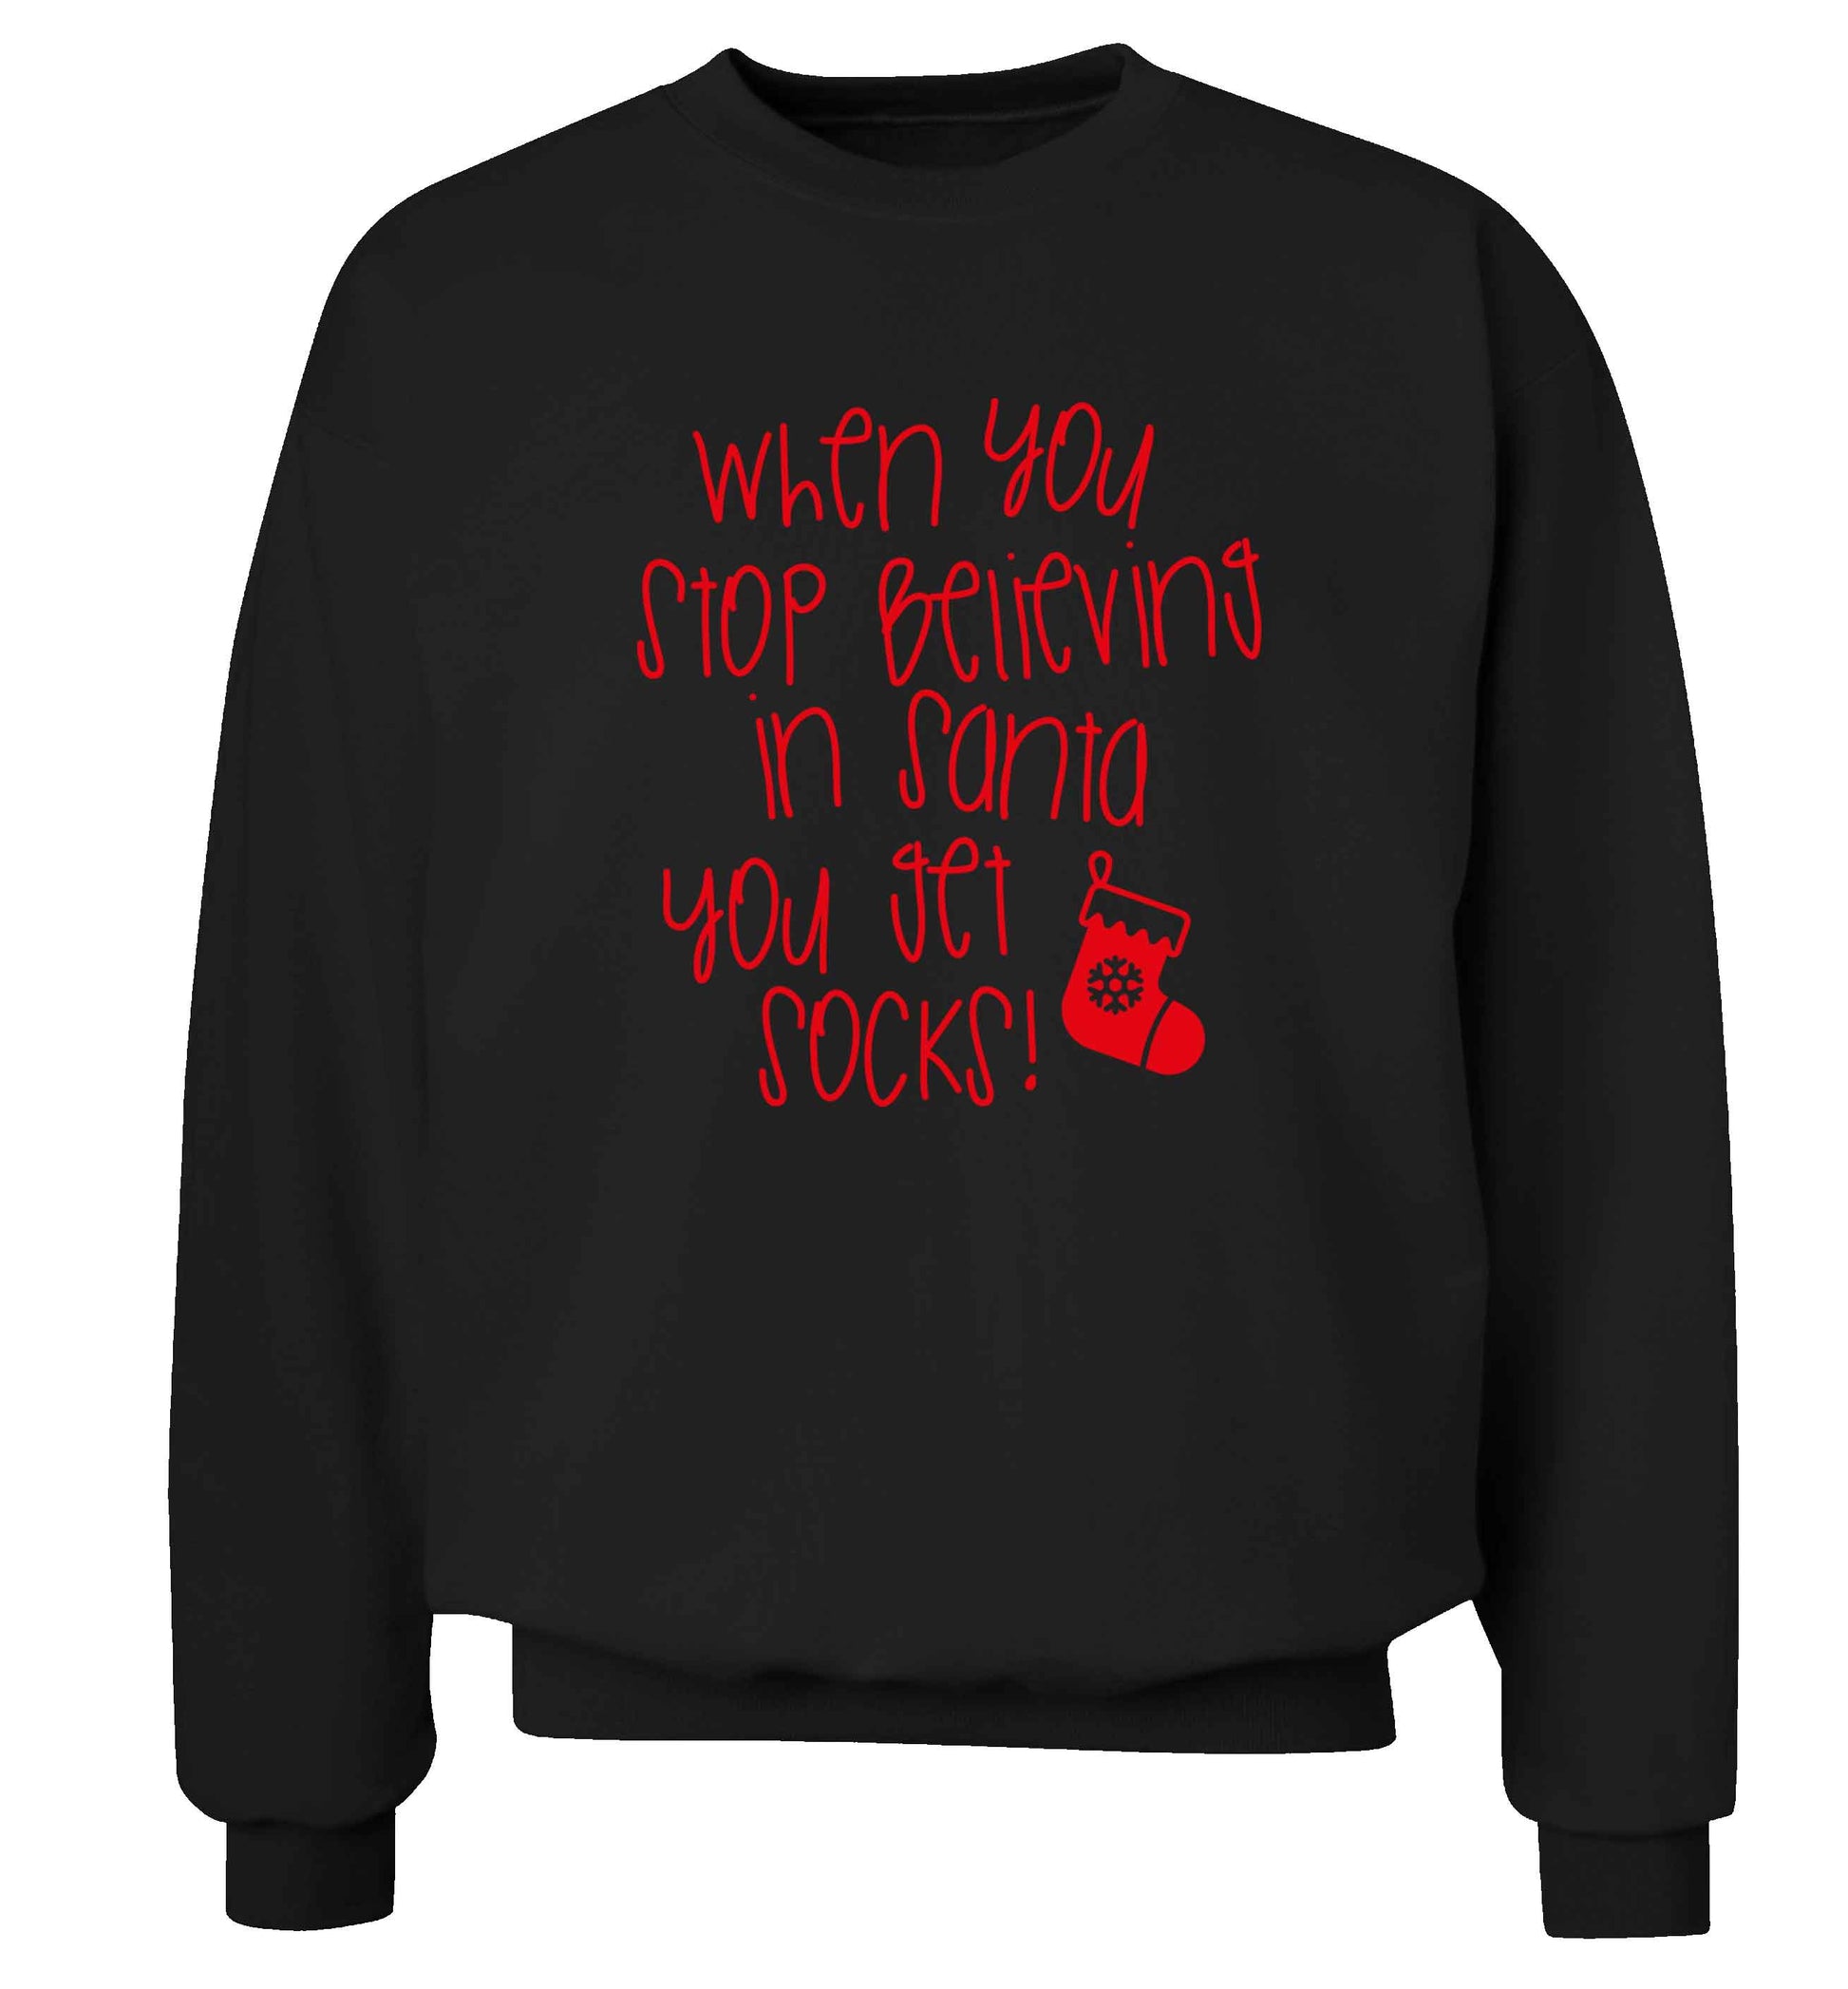 When you stop believing in santa you get socks Adult's unisex black Sweater 2XL